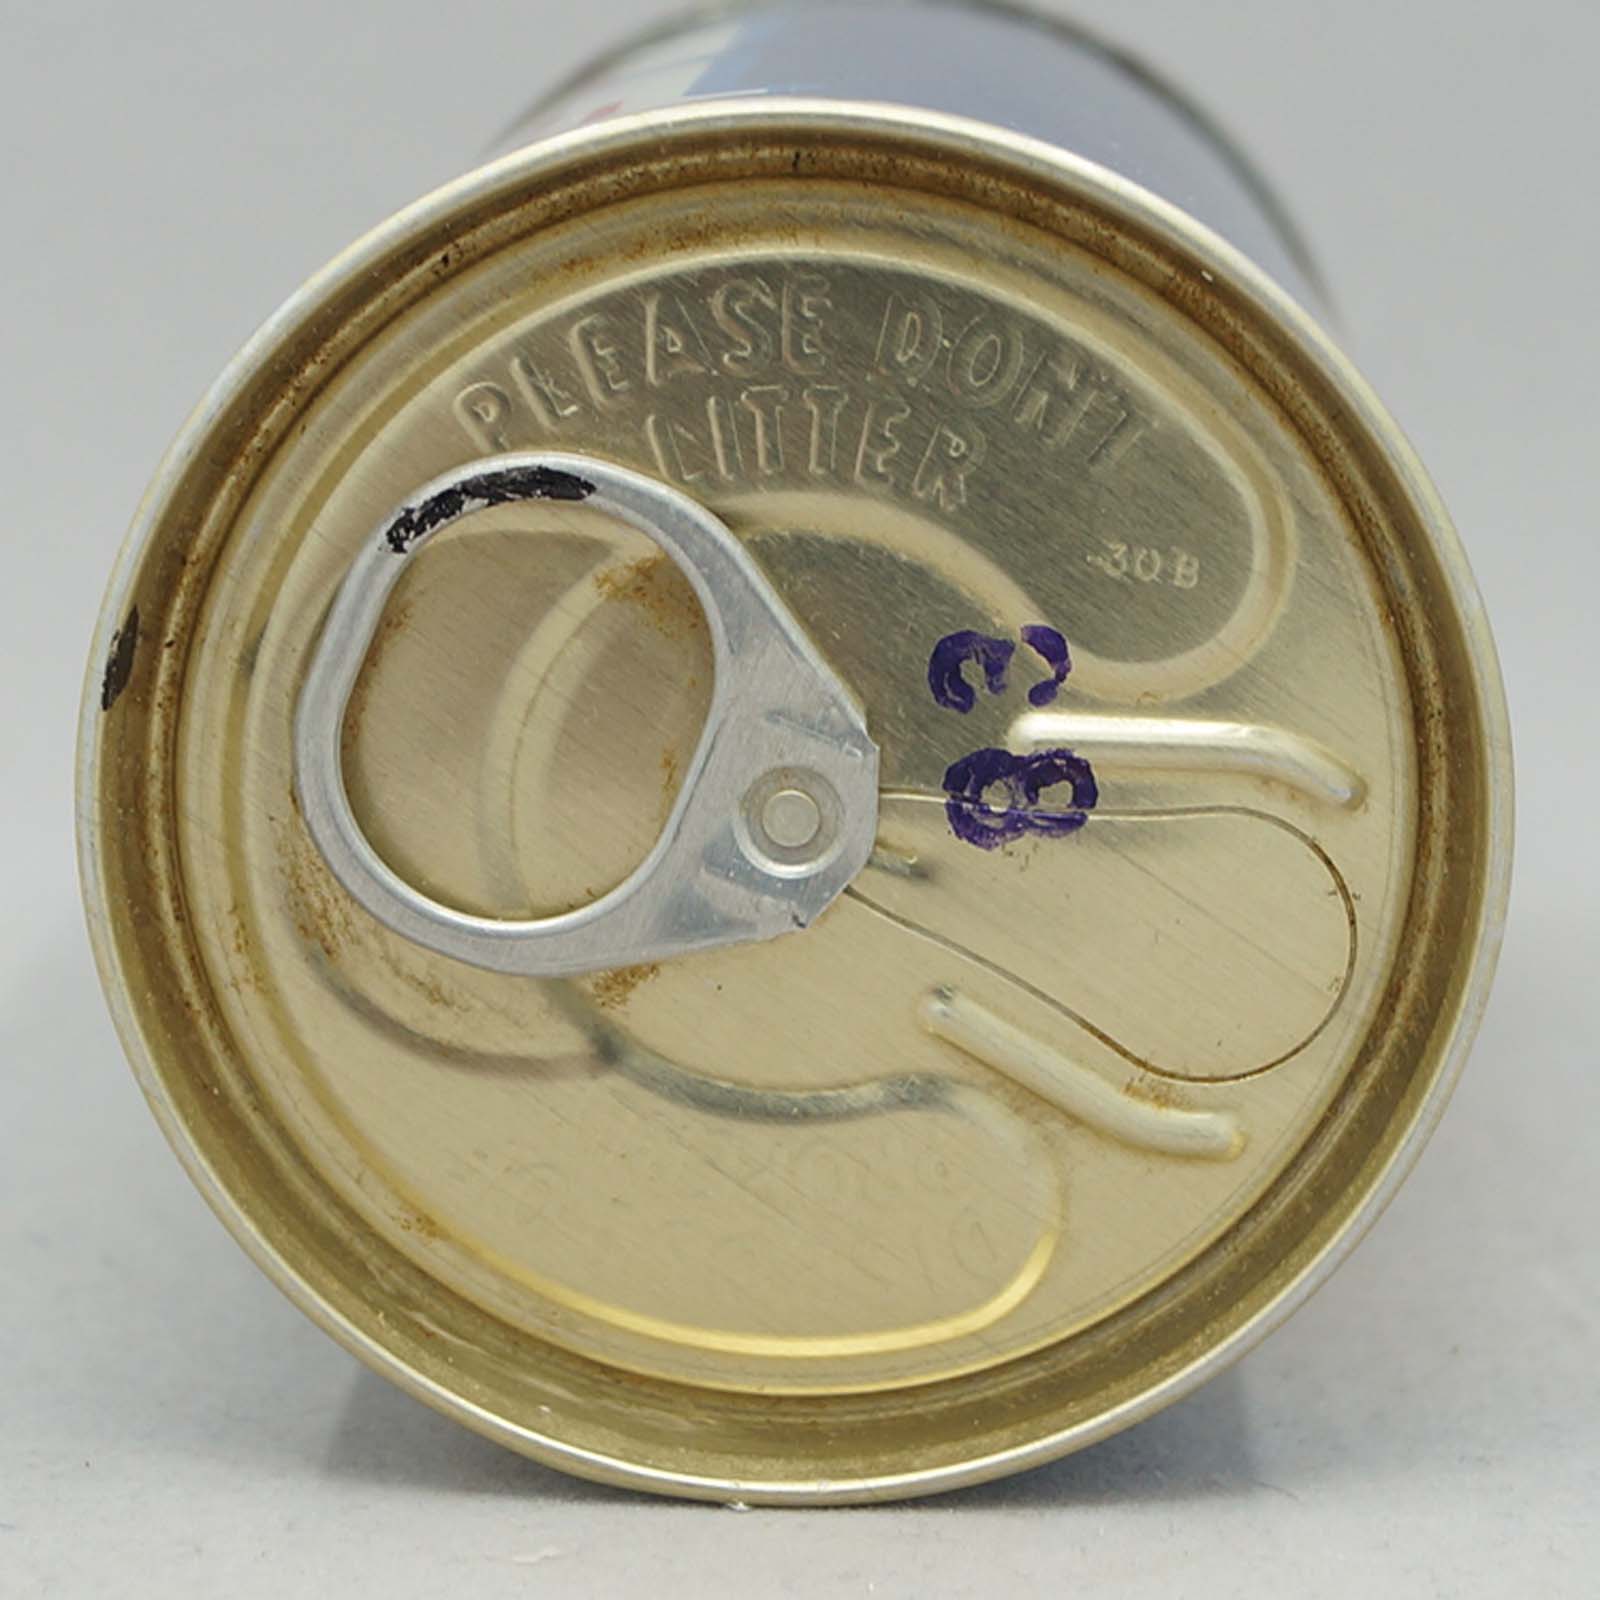 hudson house 78-12 pull tab beer can 5